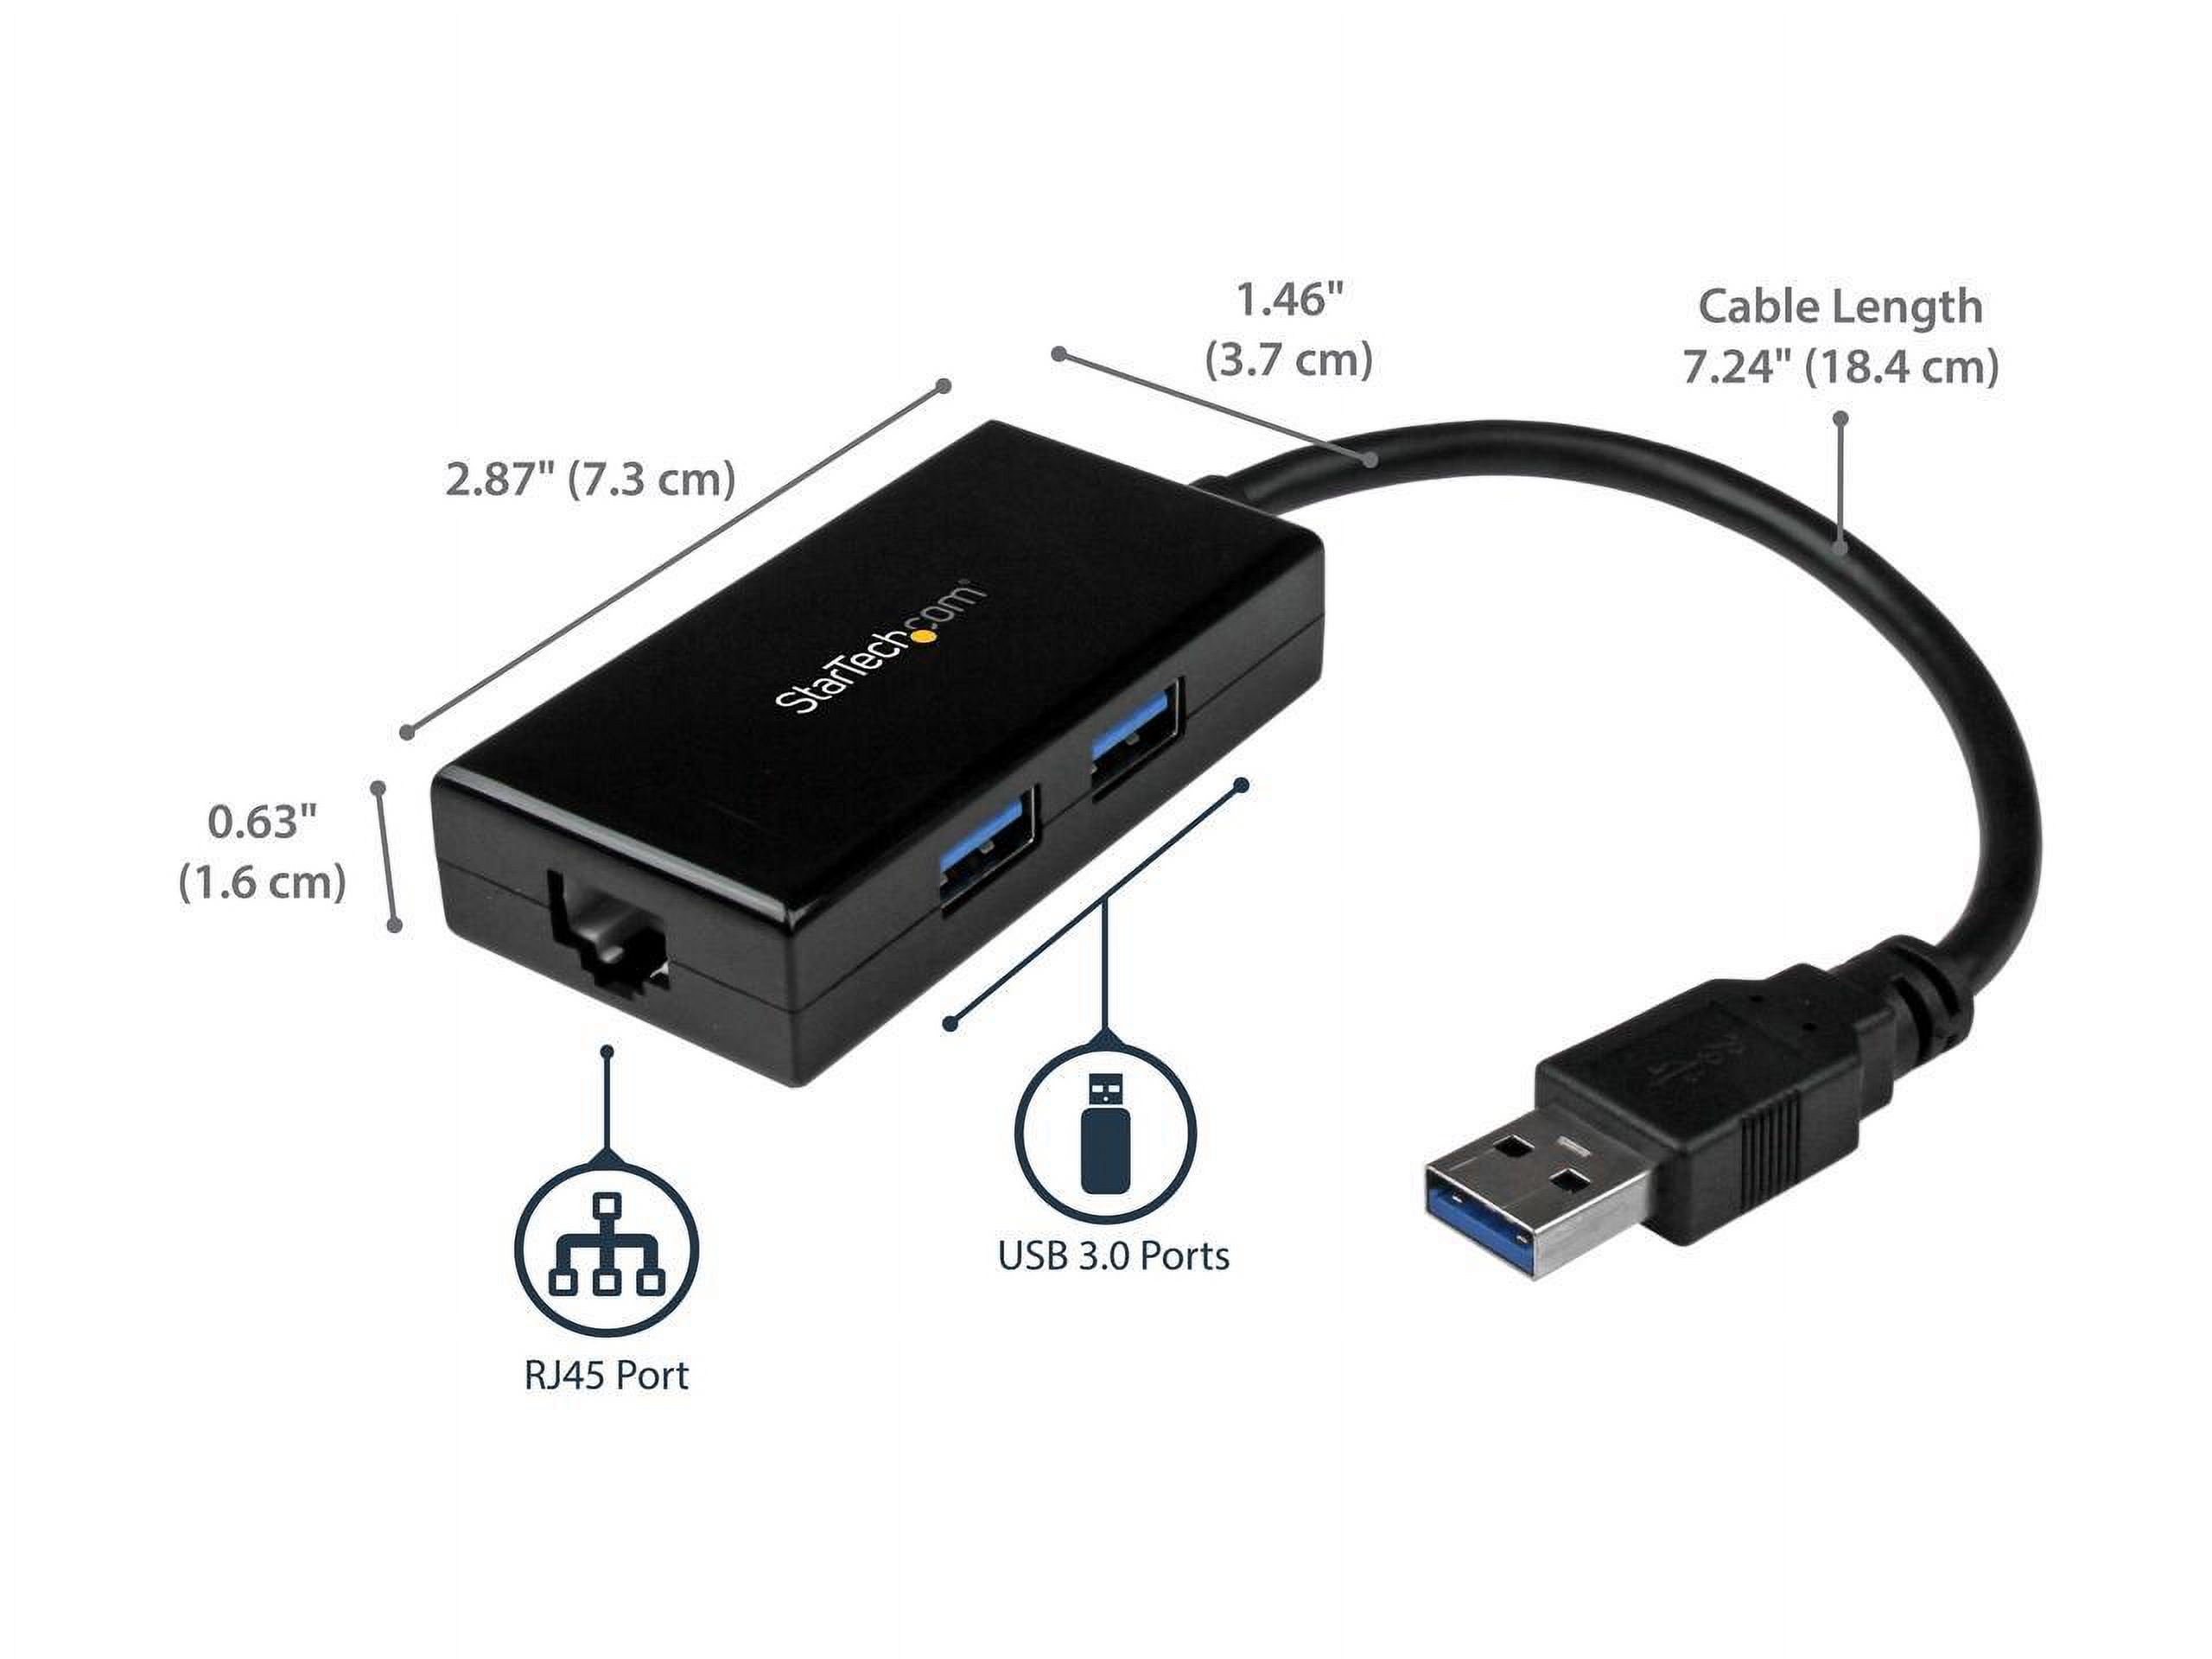 Startech USB 3.0 to Gigabit Network Adapter with Built-In 2-Port USB Hub - Native Driver Support (Windows, Mac and Chrome OS) - Add Gigabit Ethernet connectivity and two USB 3.0 ports to your lapto... - image 2 of 6